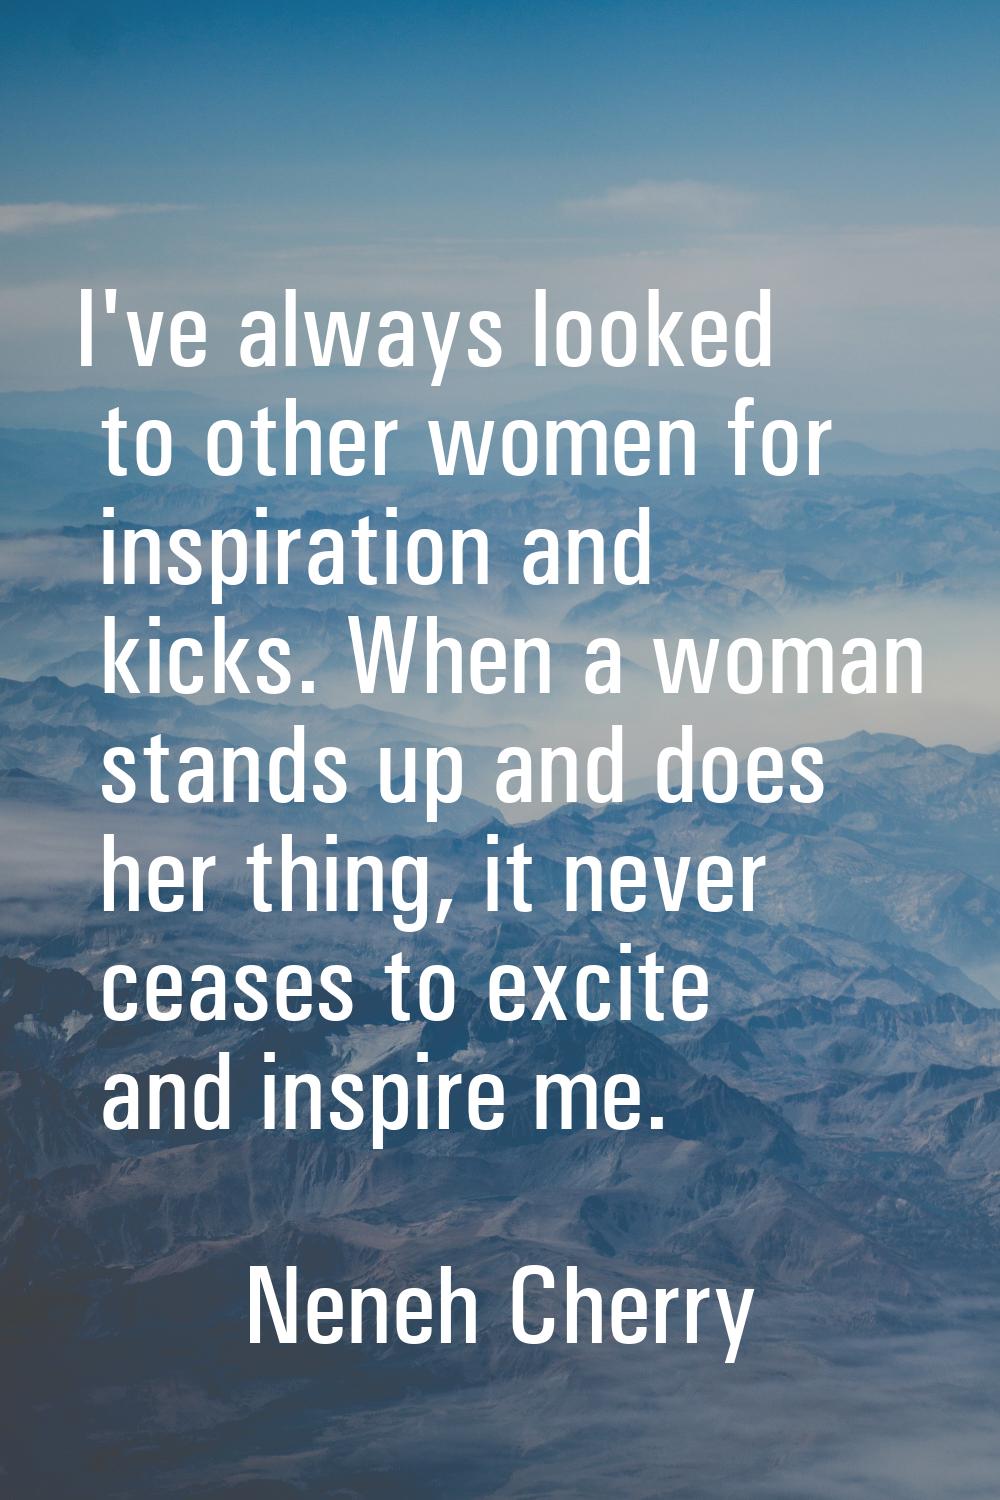 I've always looked to other women for inspiration and kicks. When a woman stands up and does her th